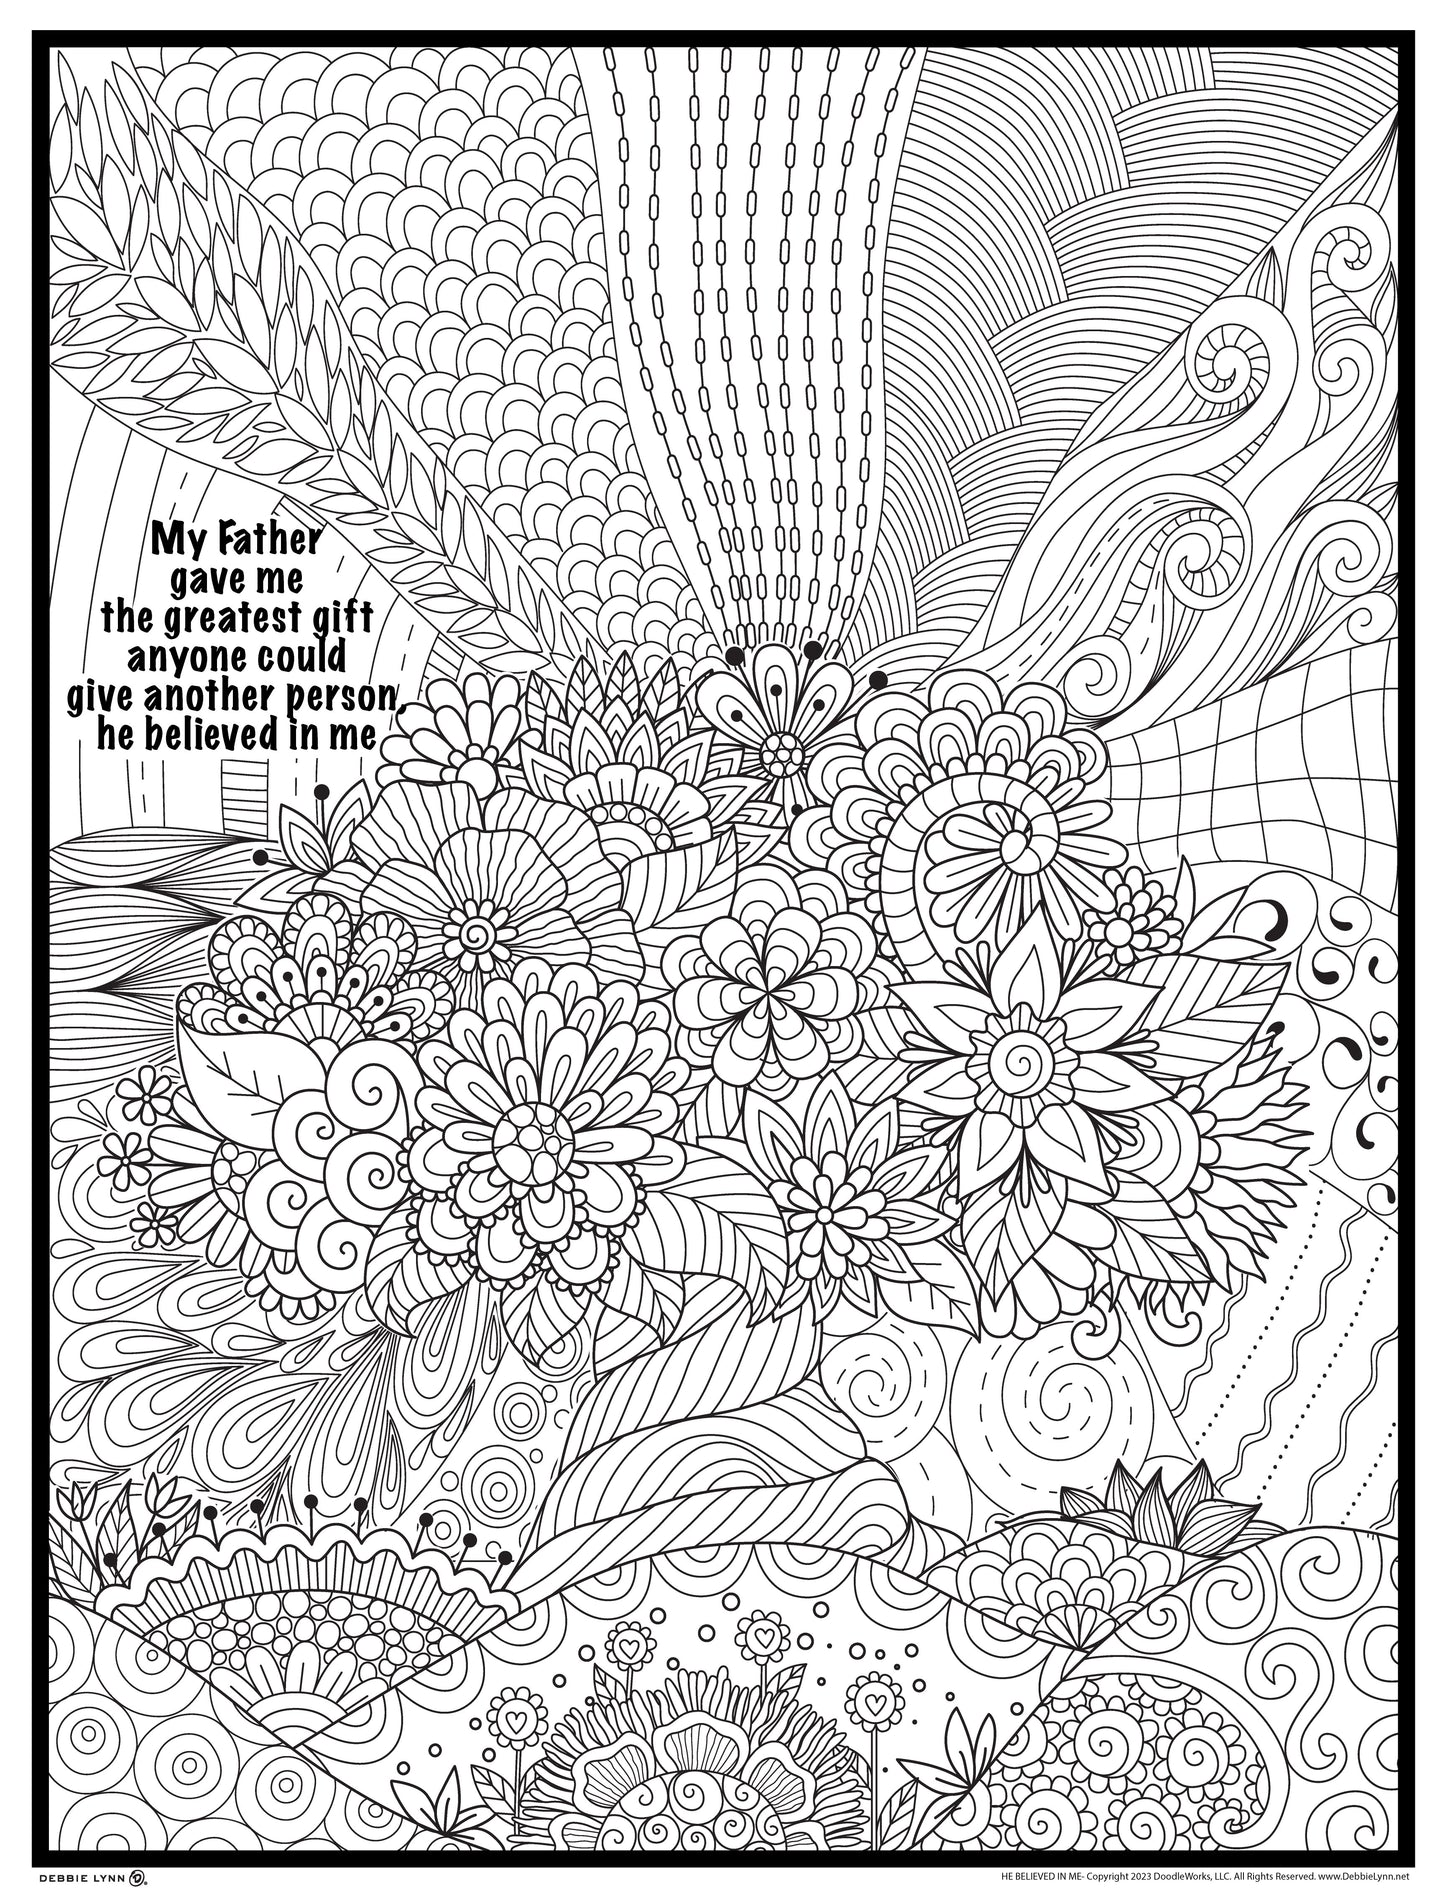 He Believed In Me Personalized Giant Coloring Poster  46"x60"